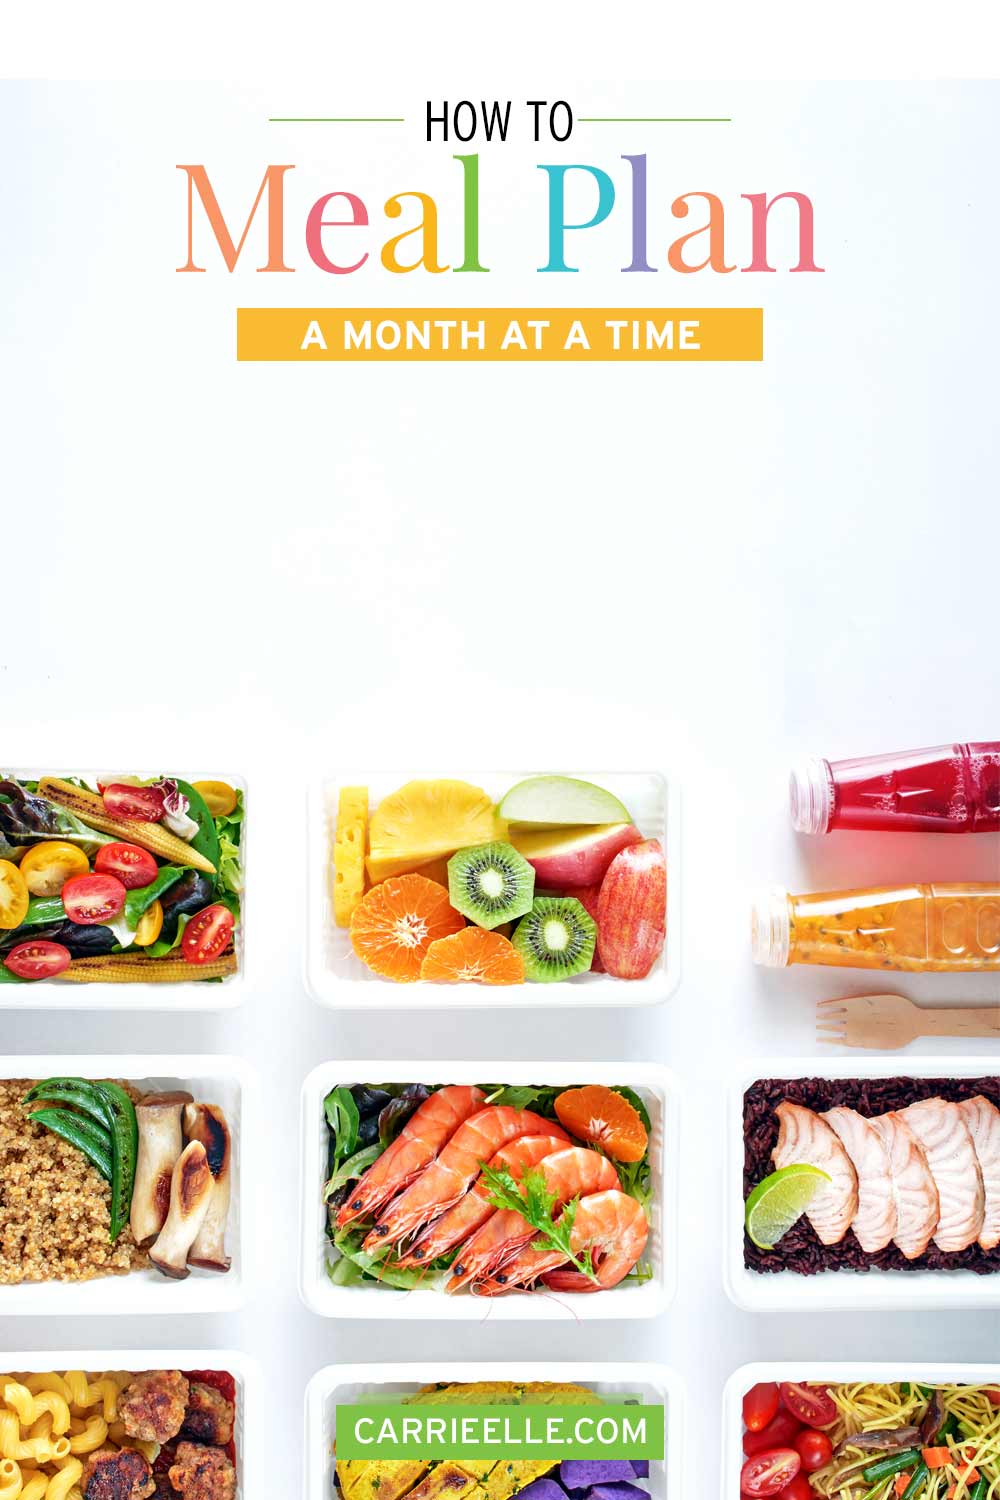 How to Meal Plan for a Month CarrieElle.com